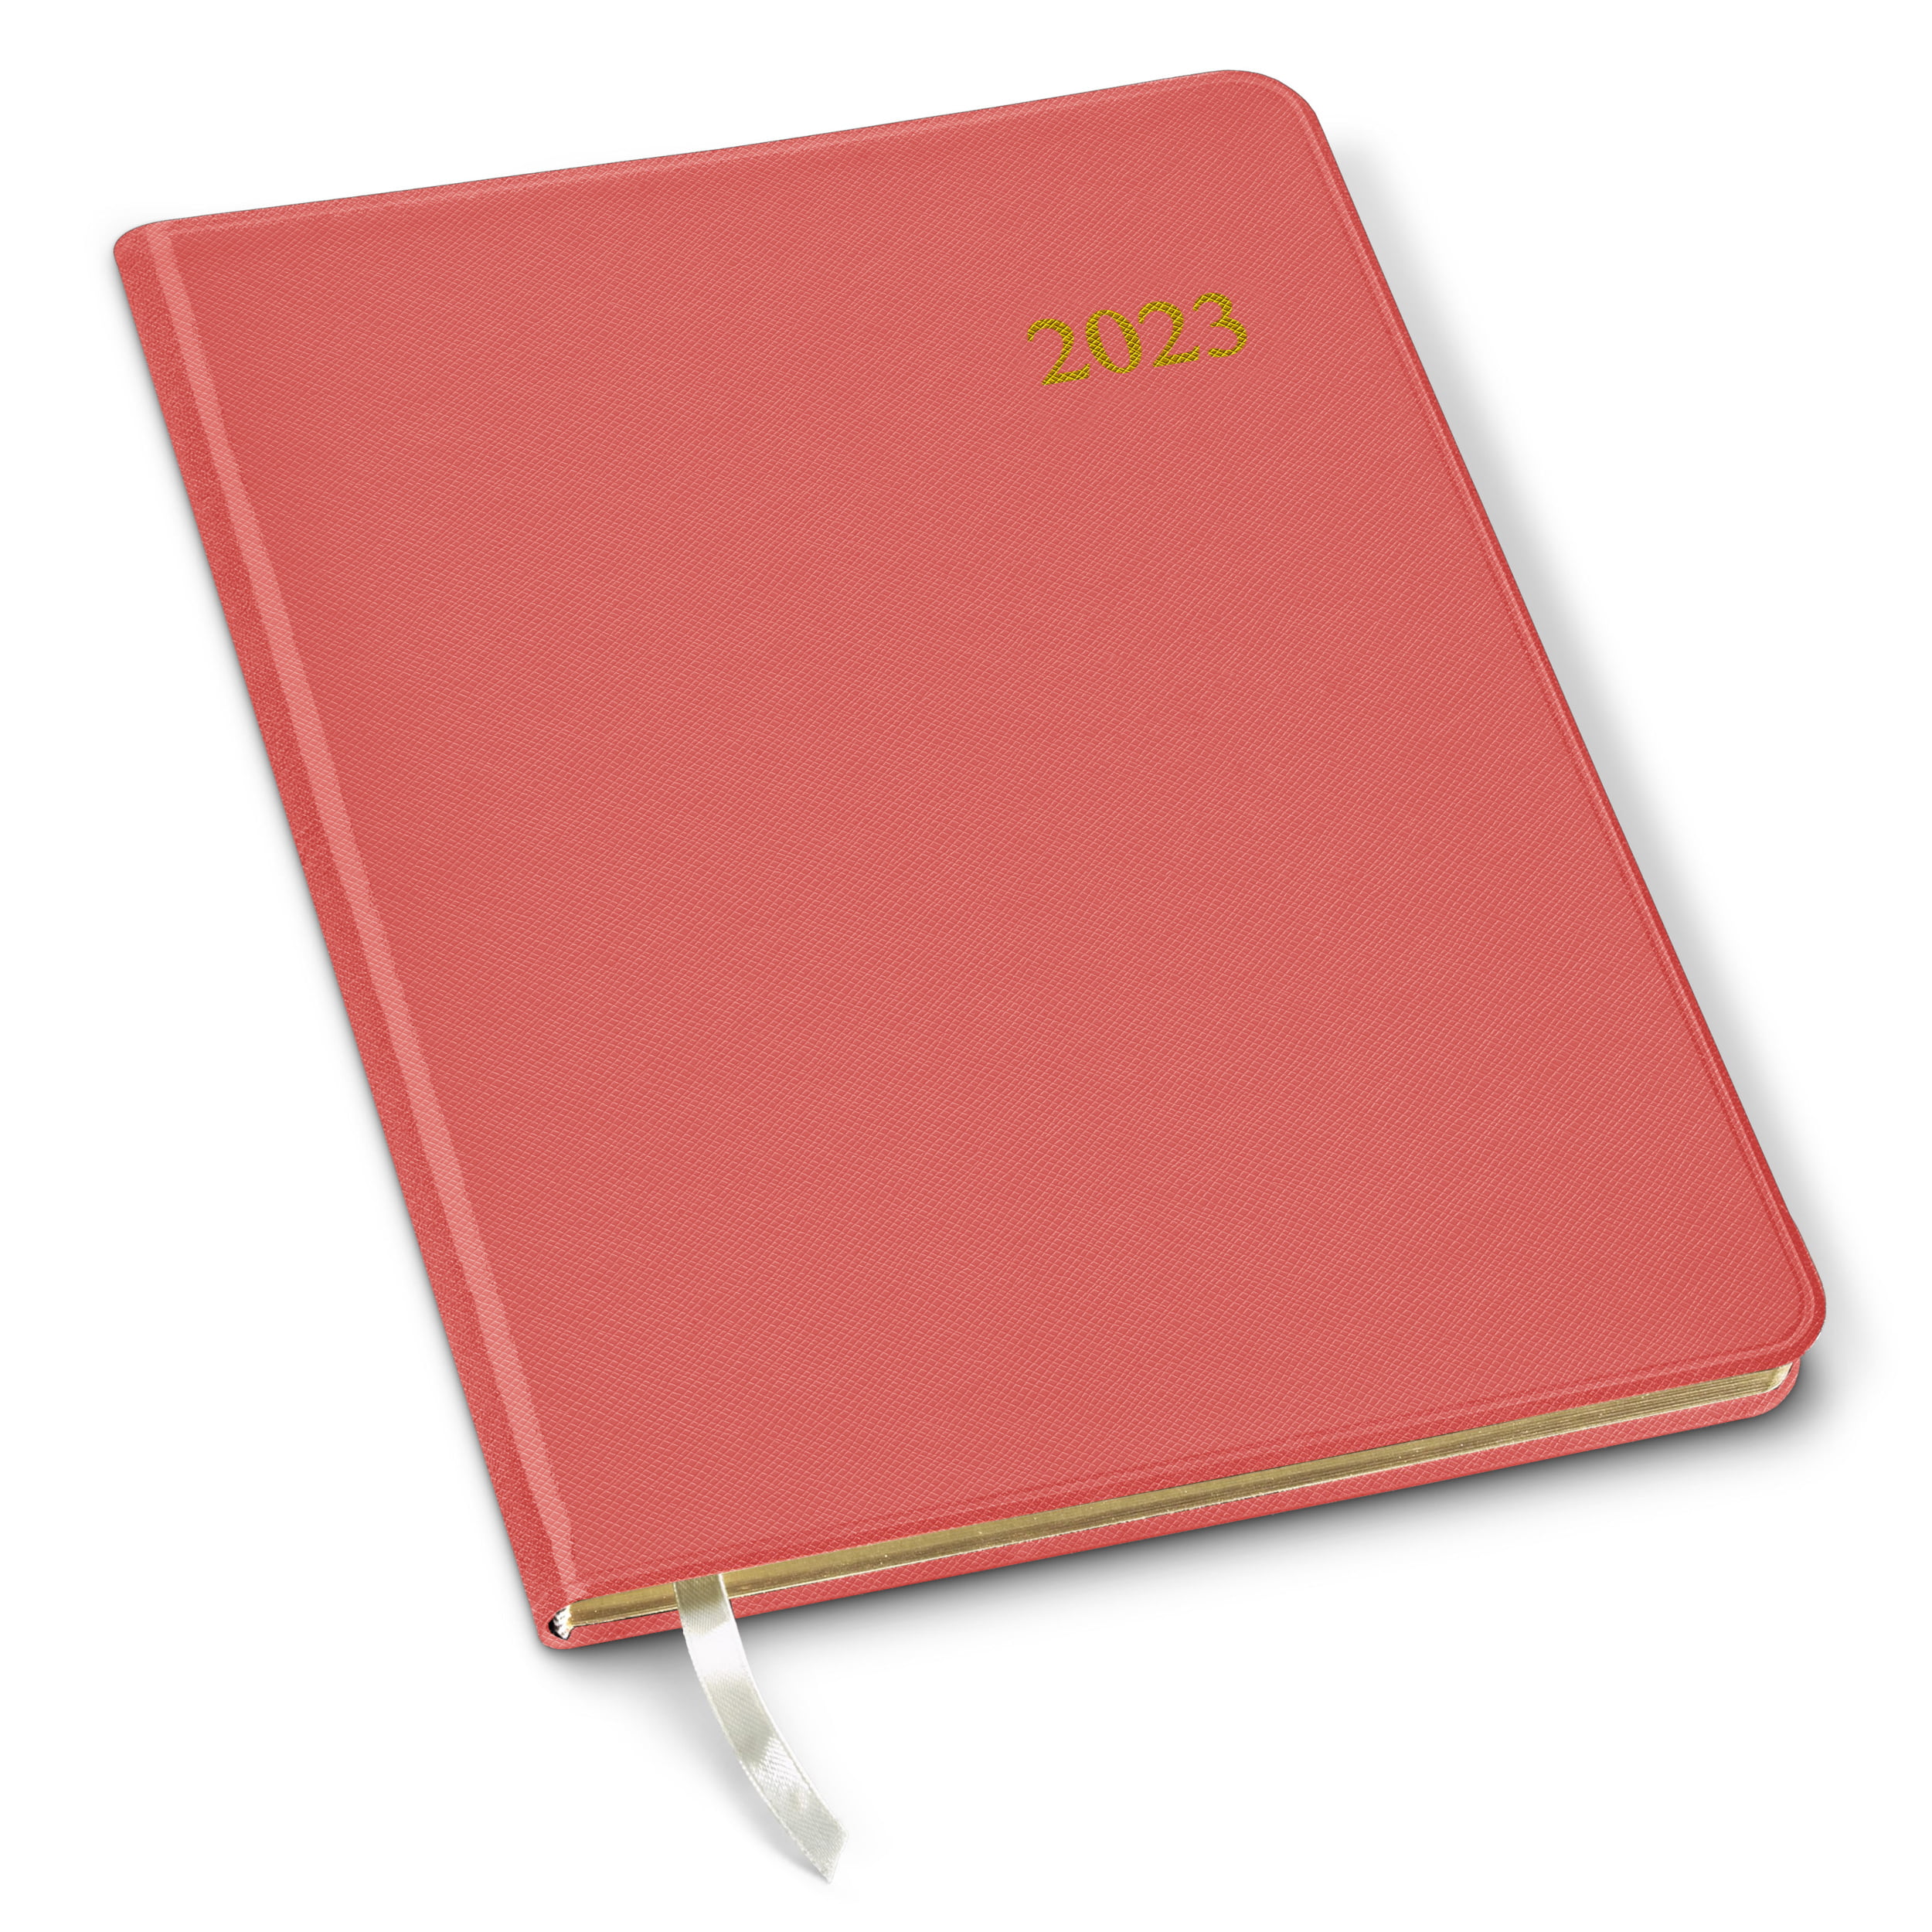 Key West Mint - 6x3.25 Pocket Address Book by Gallery Leather Green 